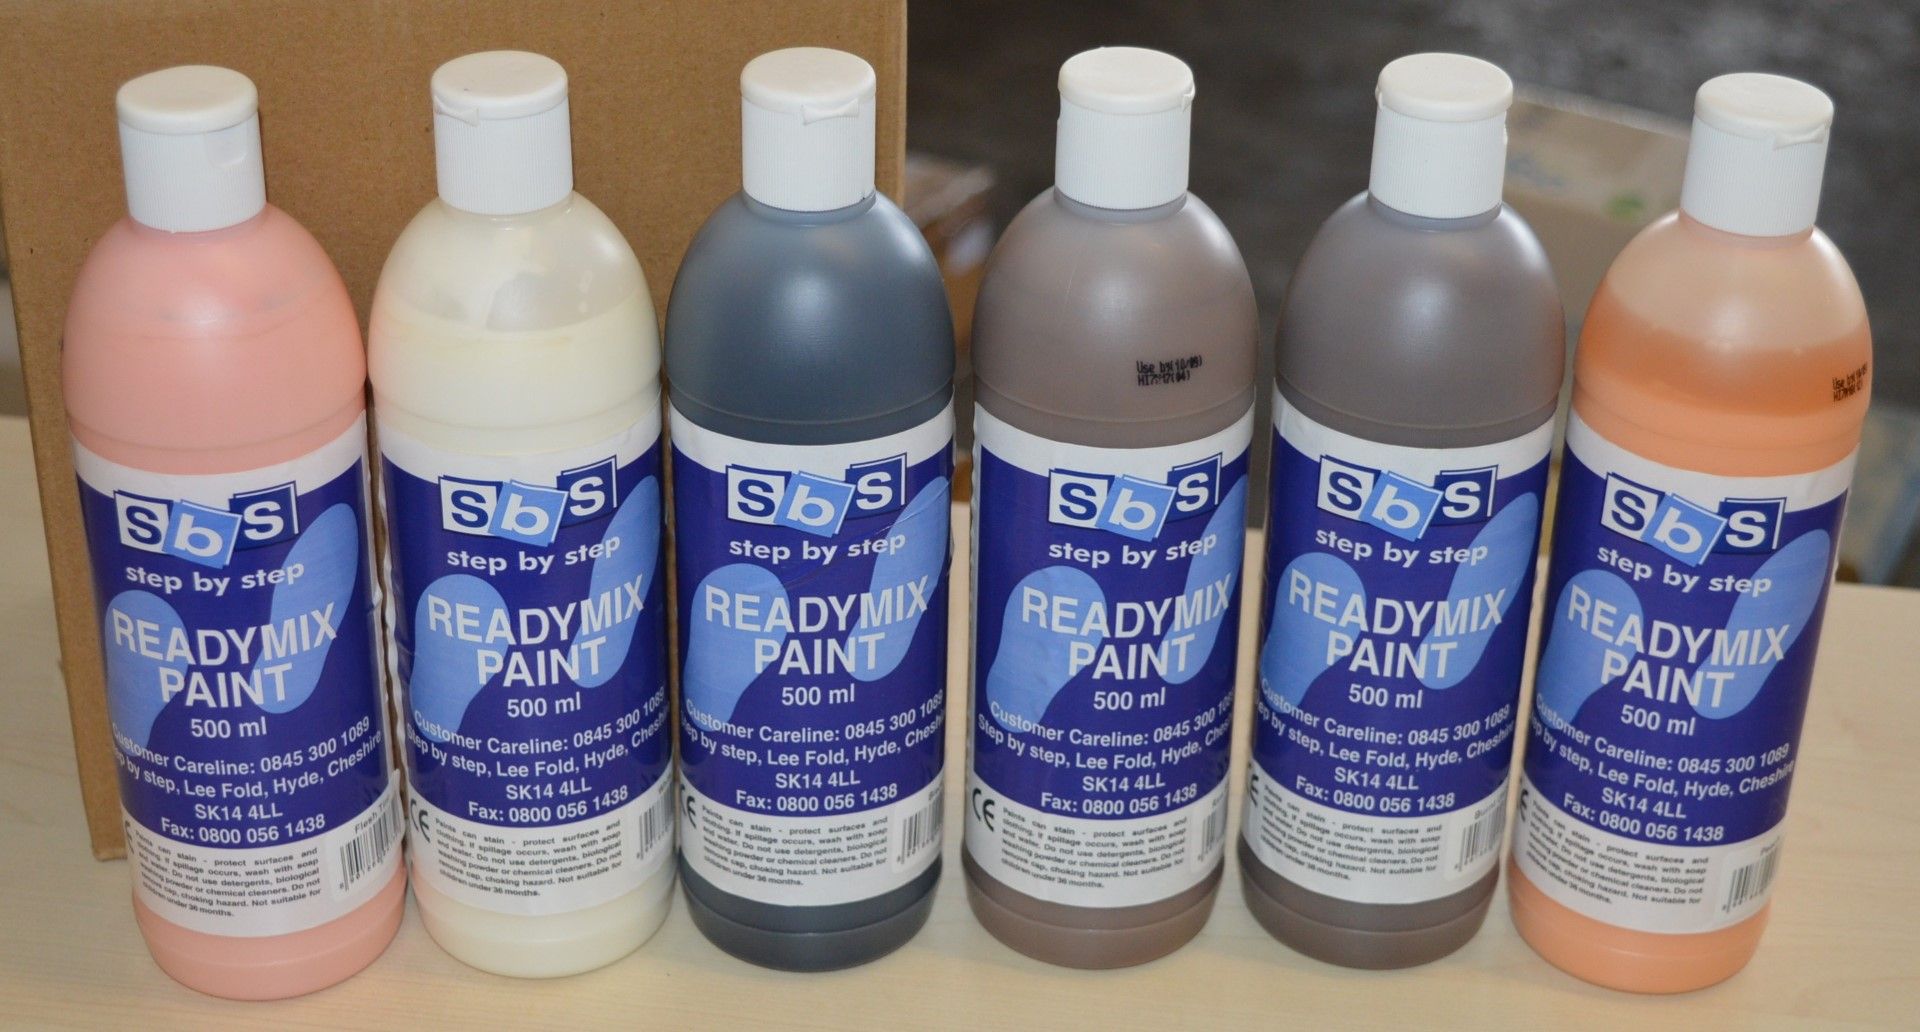 48 x Sets of SBS Step by Step Readymix Paint - 288 x 500ml Bottles - 48 x Sets of 6 Bottles in 8 x